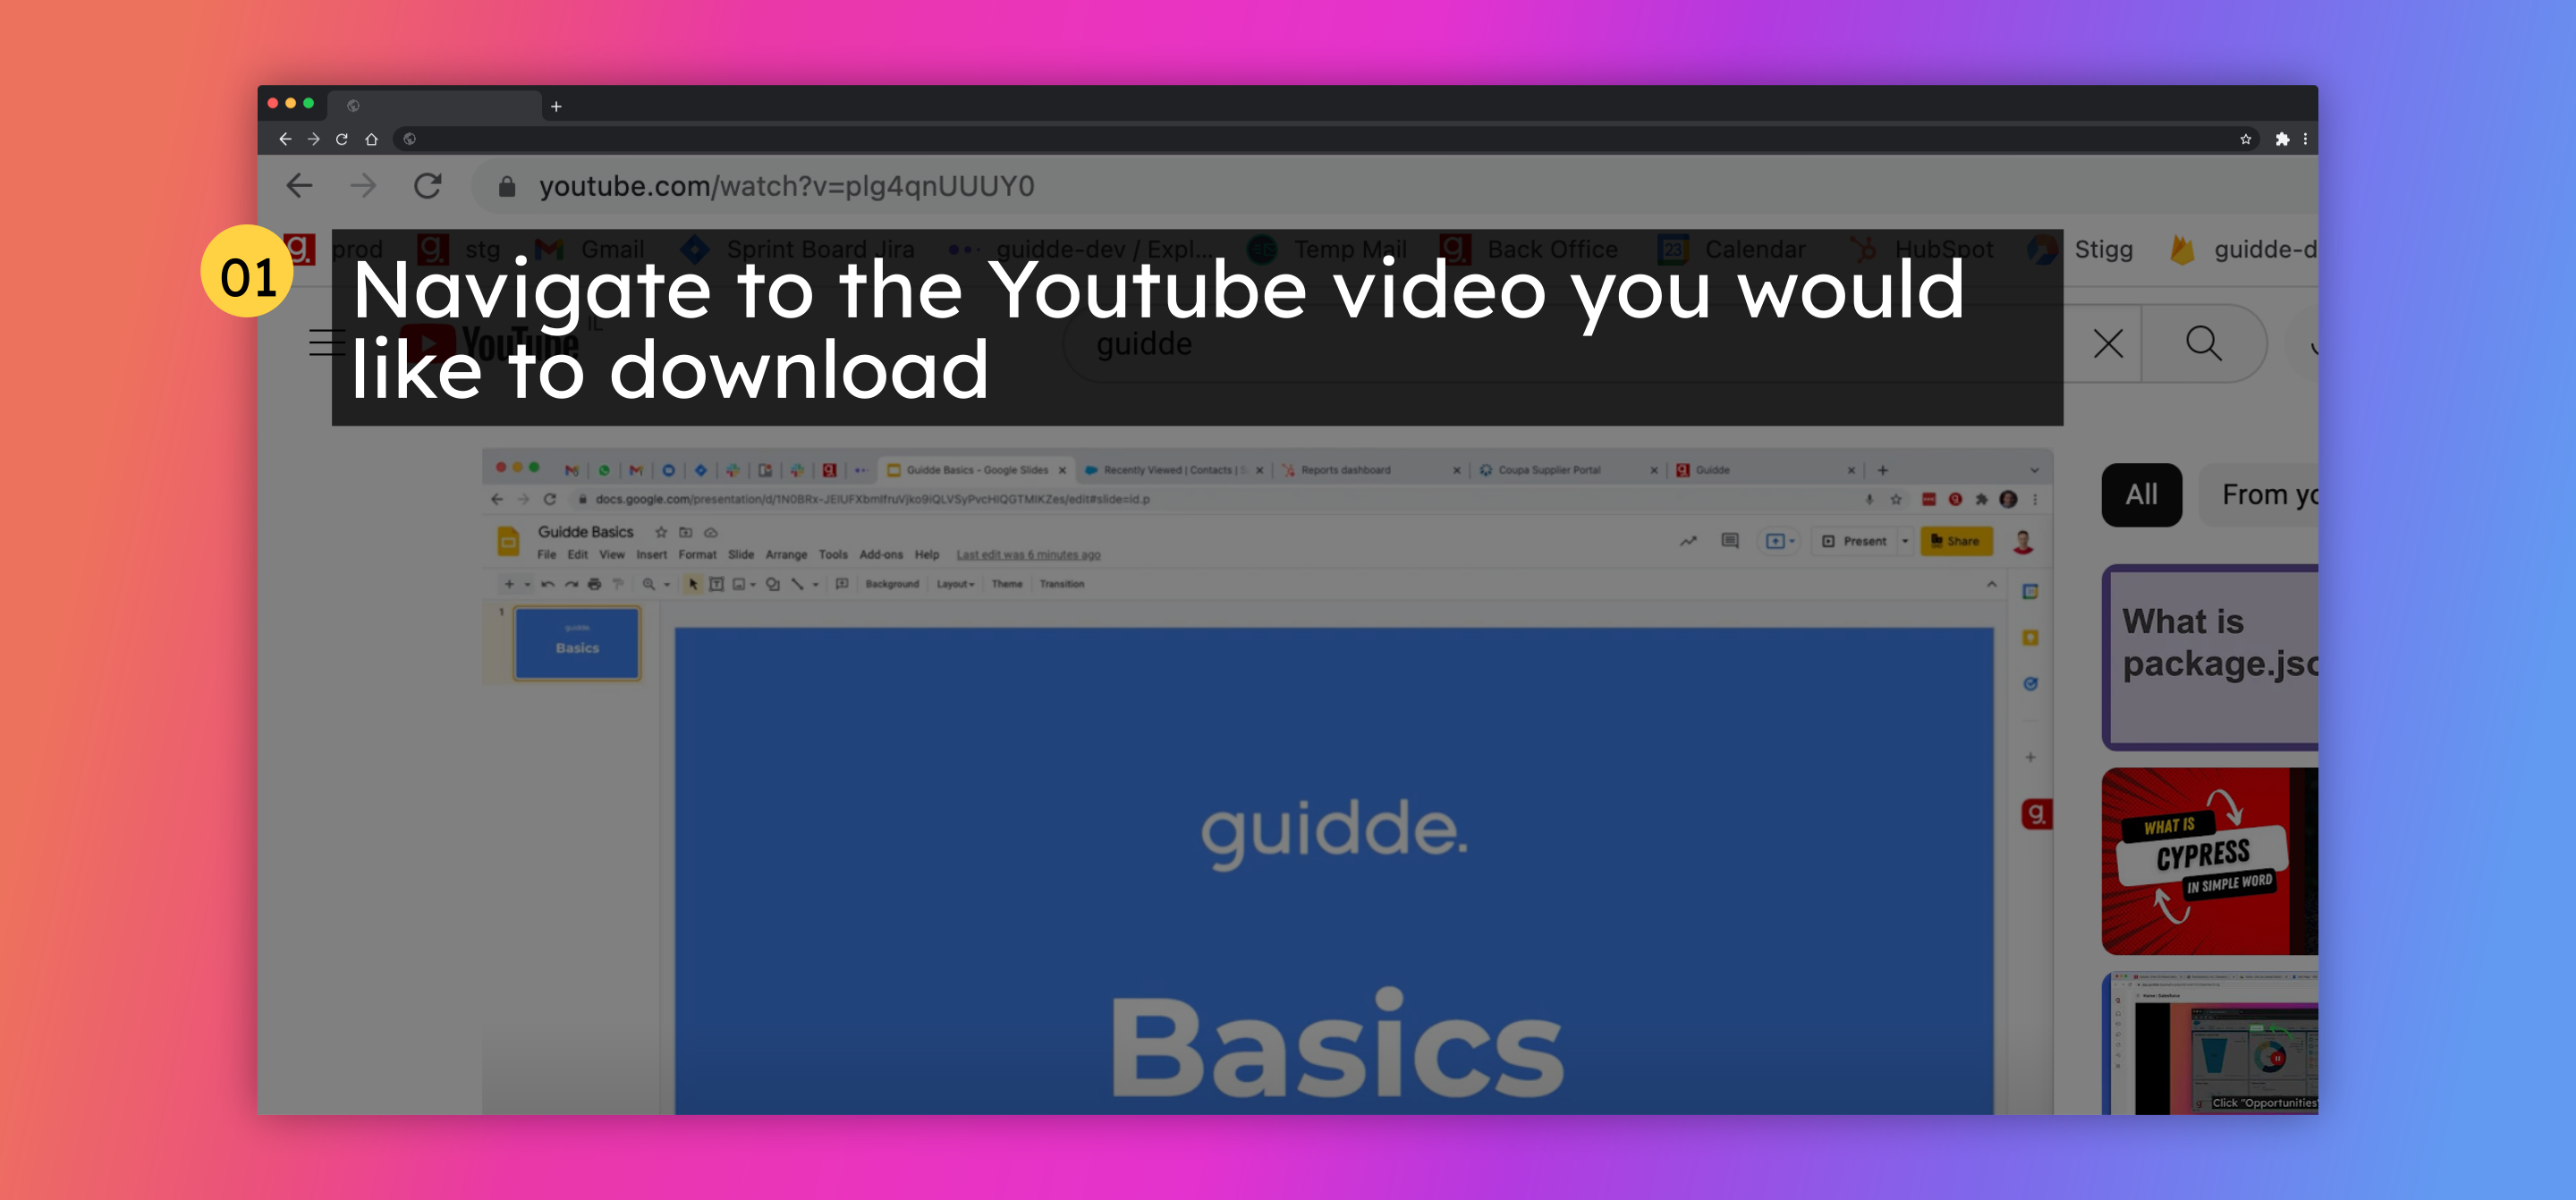 Navigate to the Youtube video you would like to download